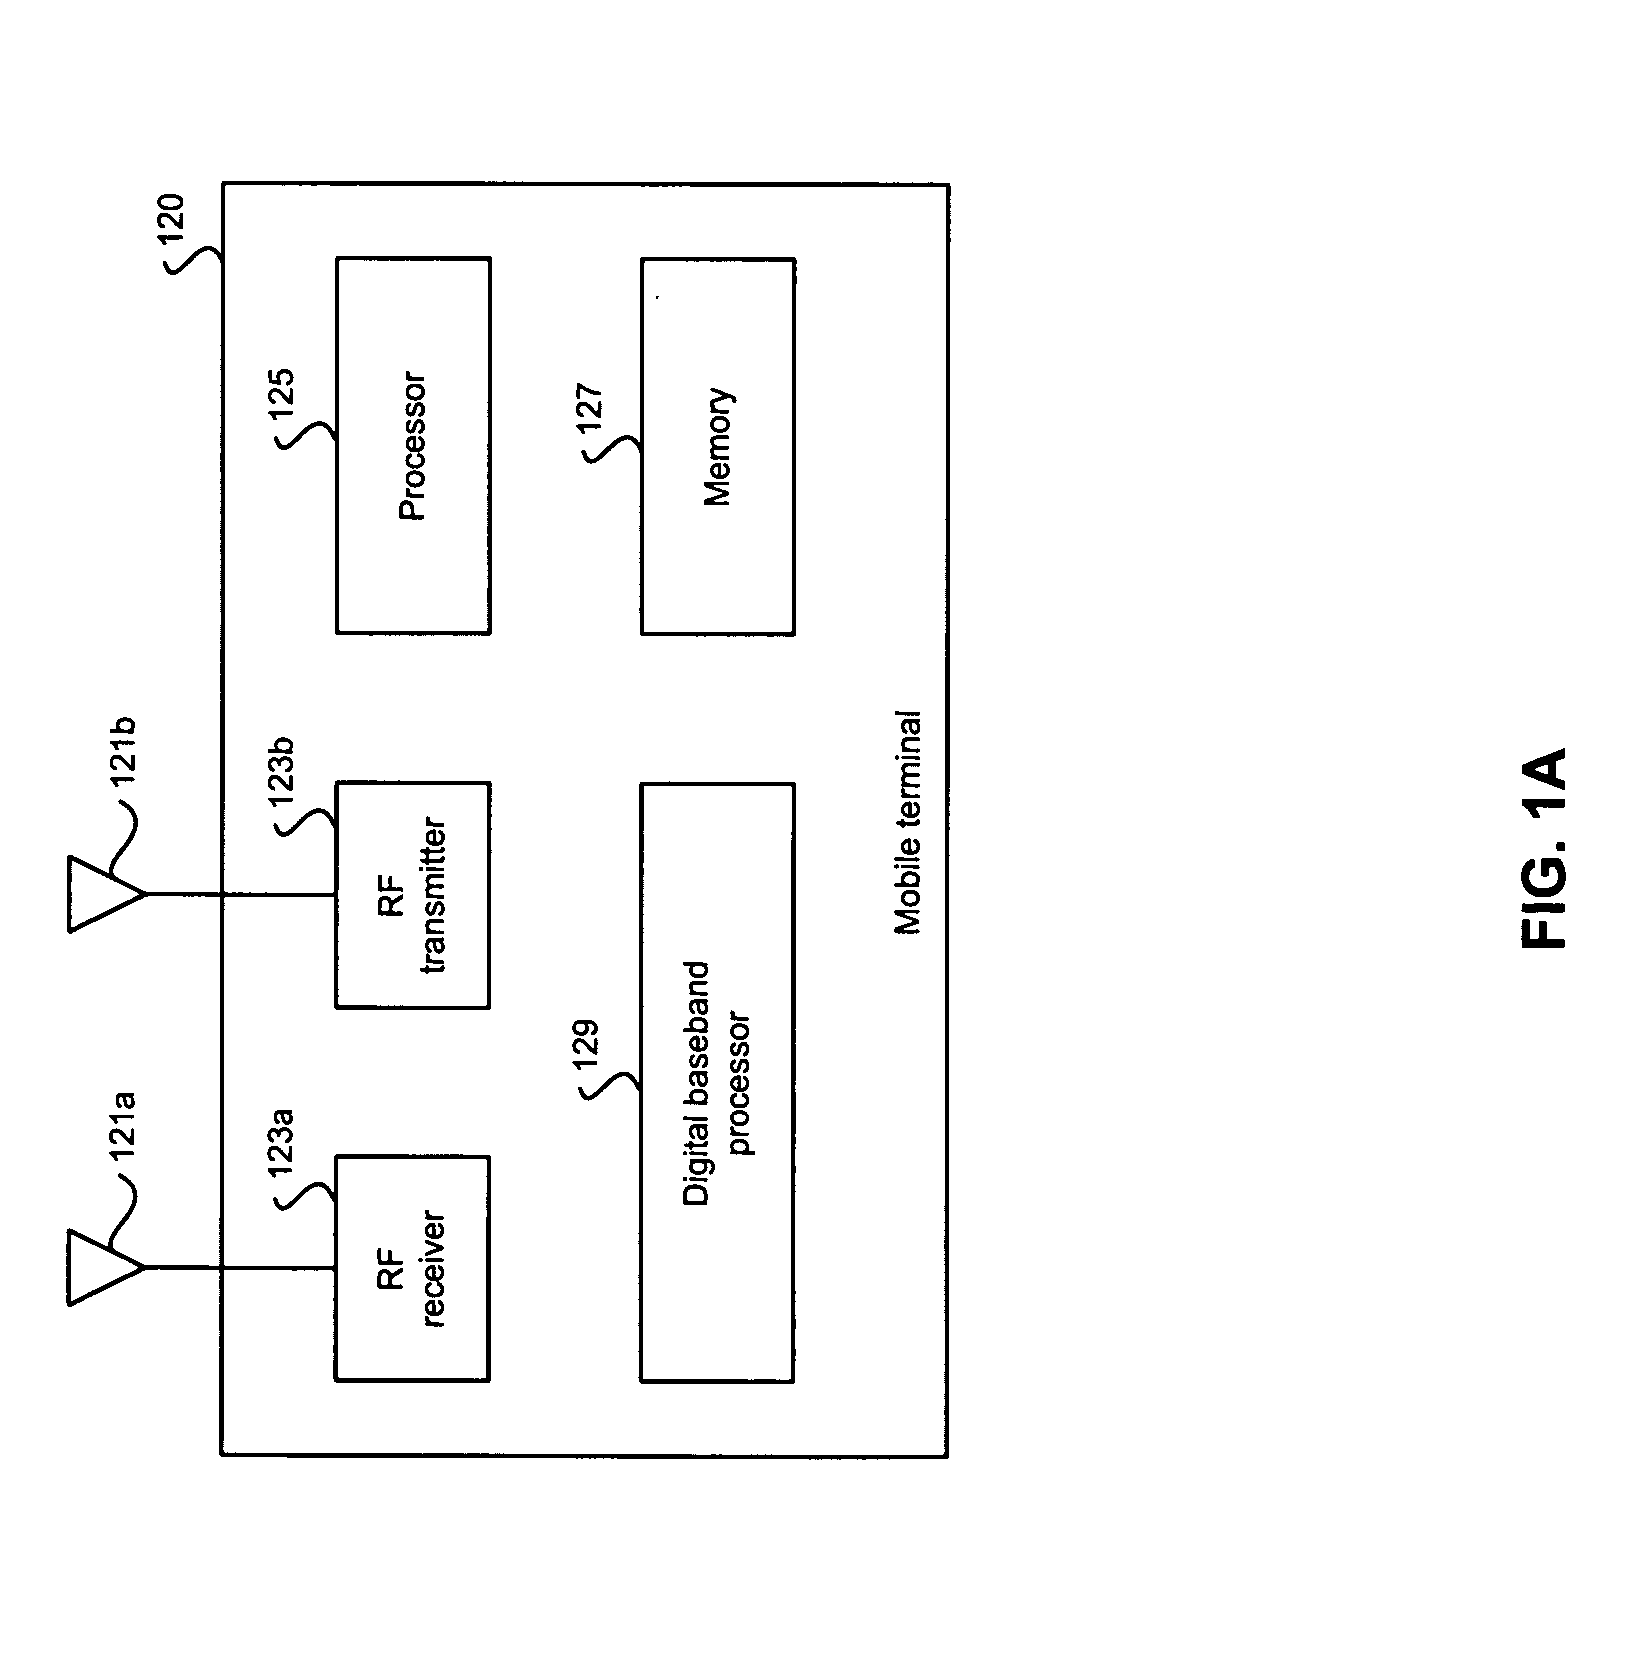 Method and system for bandwidth calibration for a phase locked loop (PLL)